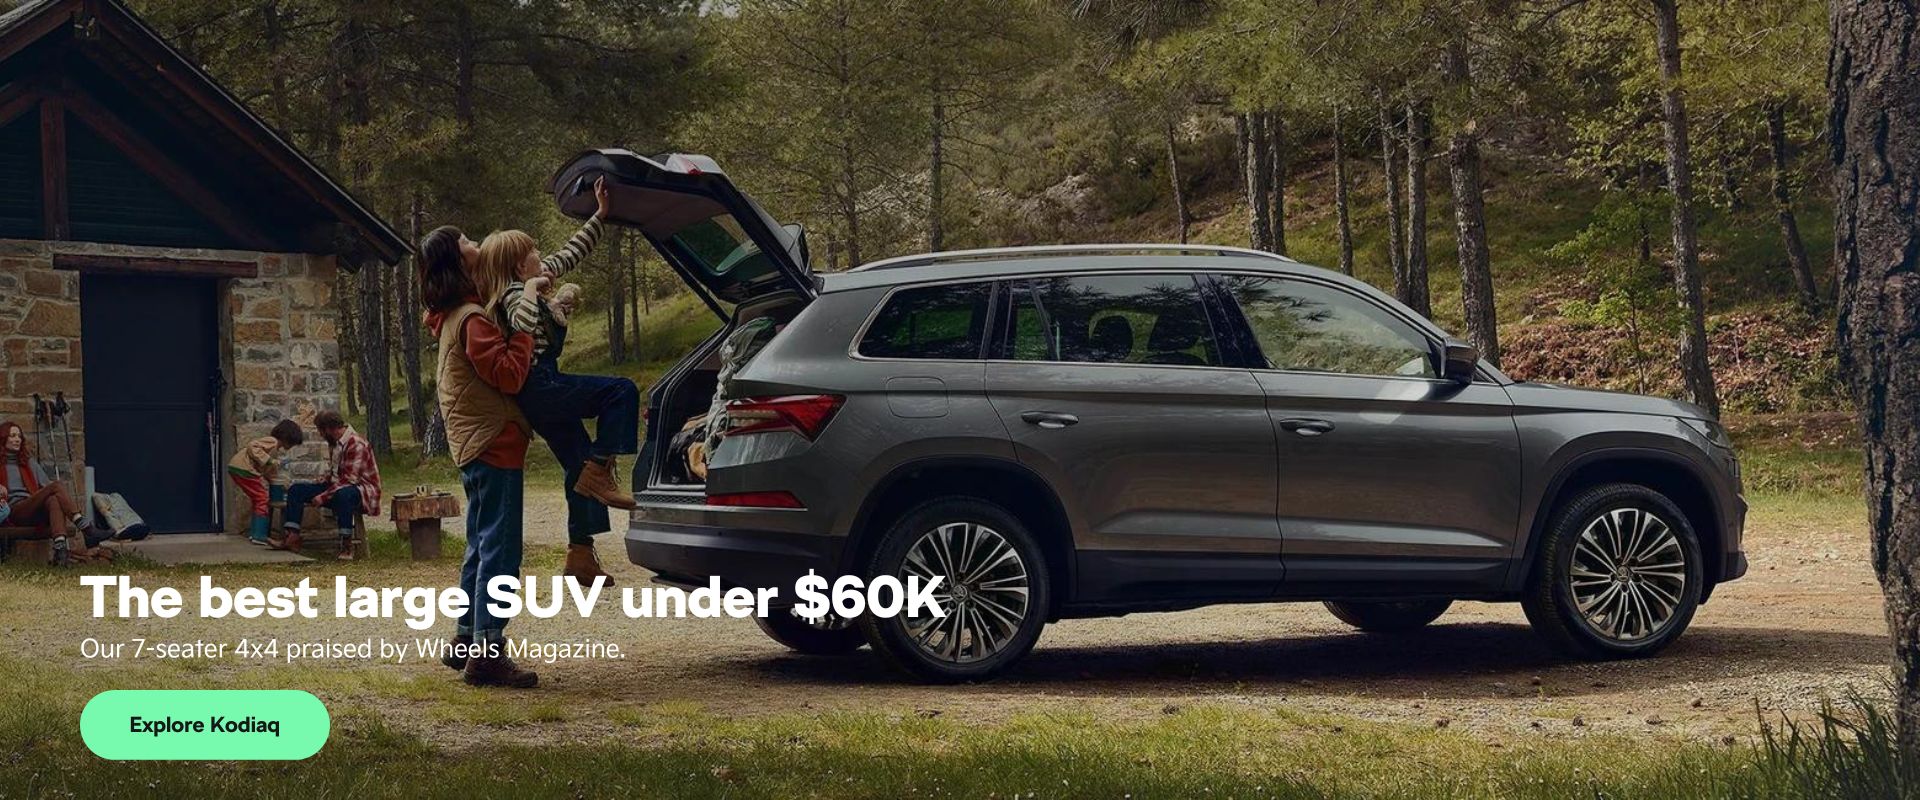 The best large SUV under 60K. Our 7 seater 4x4 praised by Wheels Magazine. Explore Kodiaq